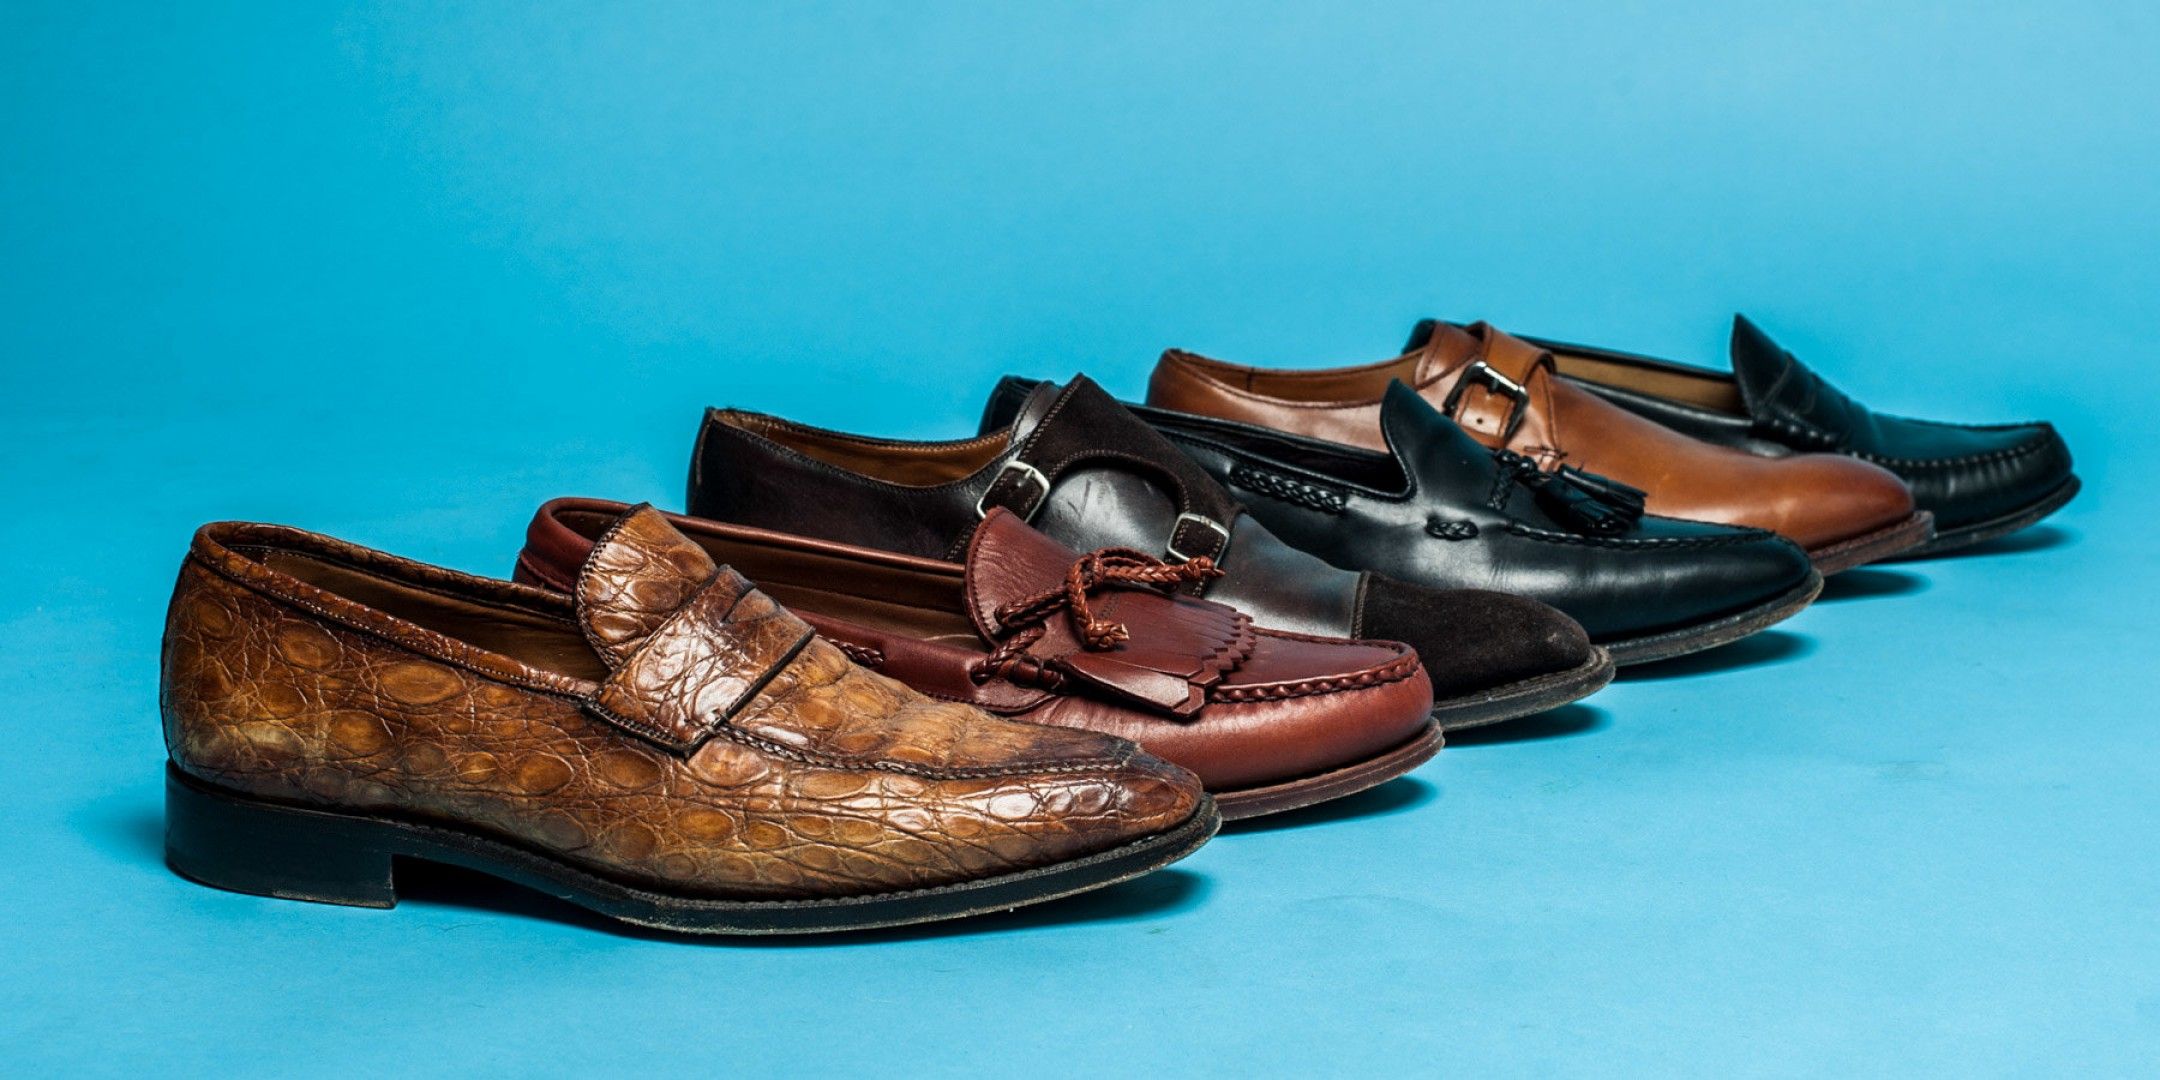 Men's Dress Shoe Styles: What to Wear When for Work and Special Occasions